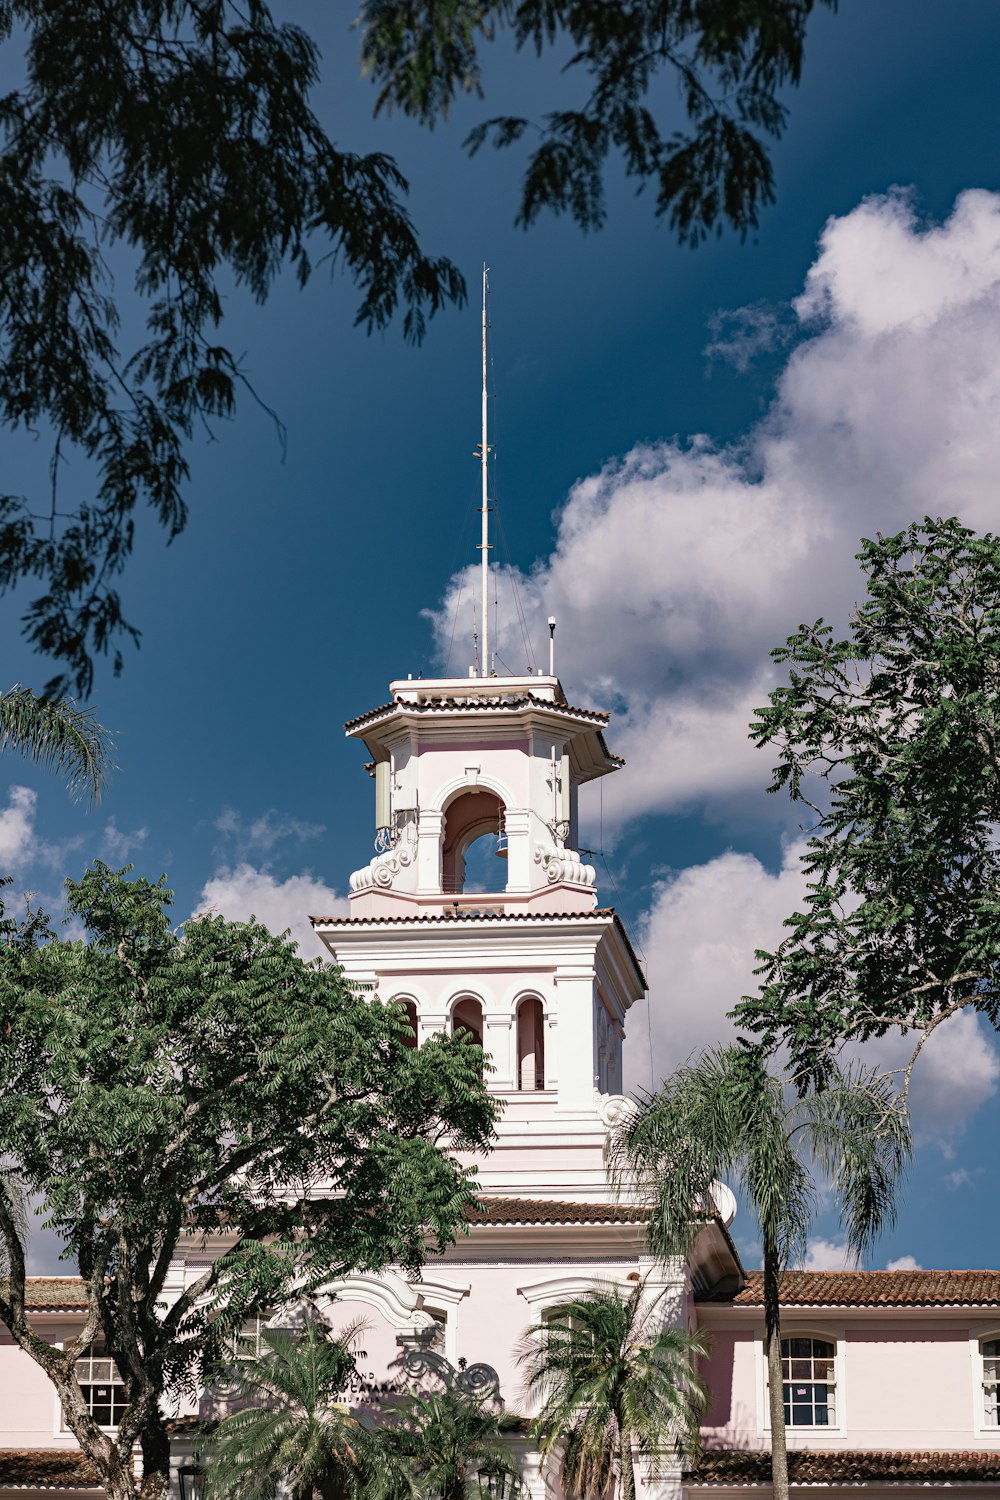 a tall white building with a clock tower